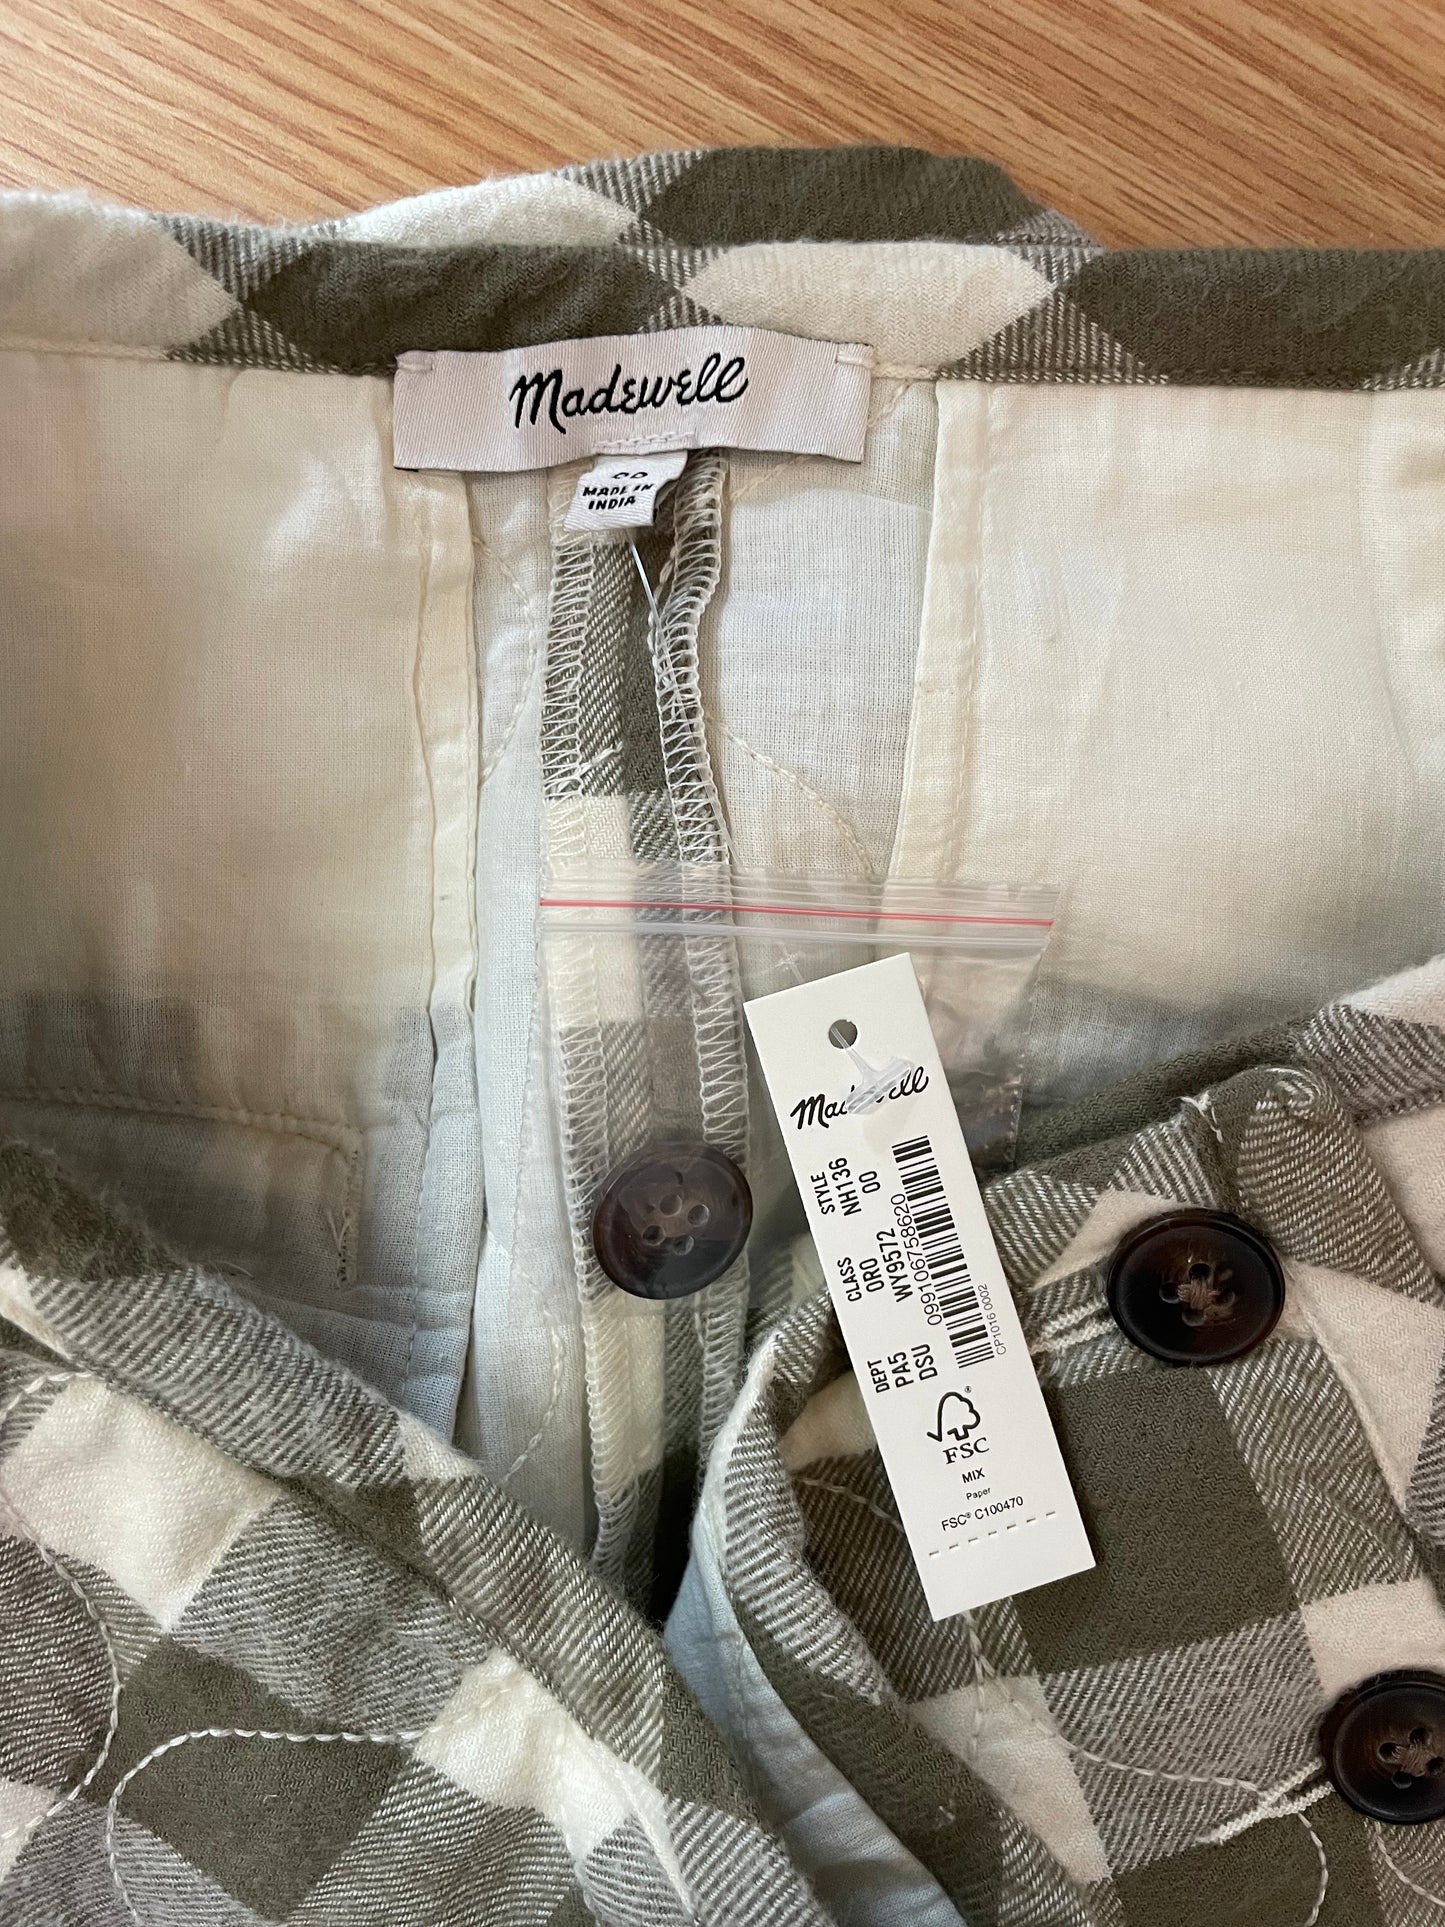 Madewell "Quilted Flannel Mini"